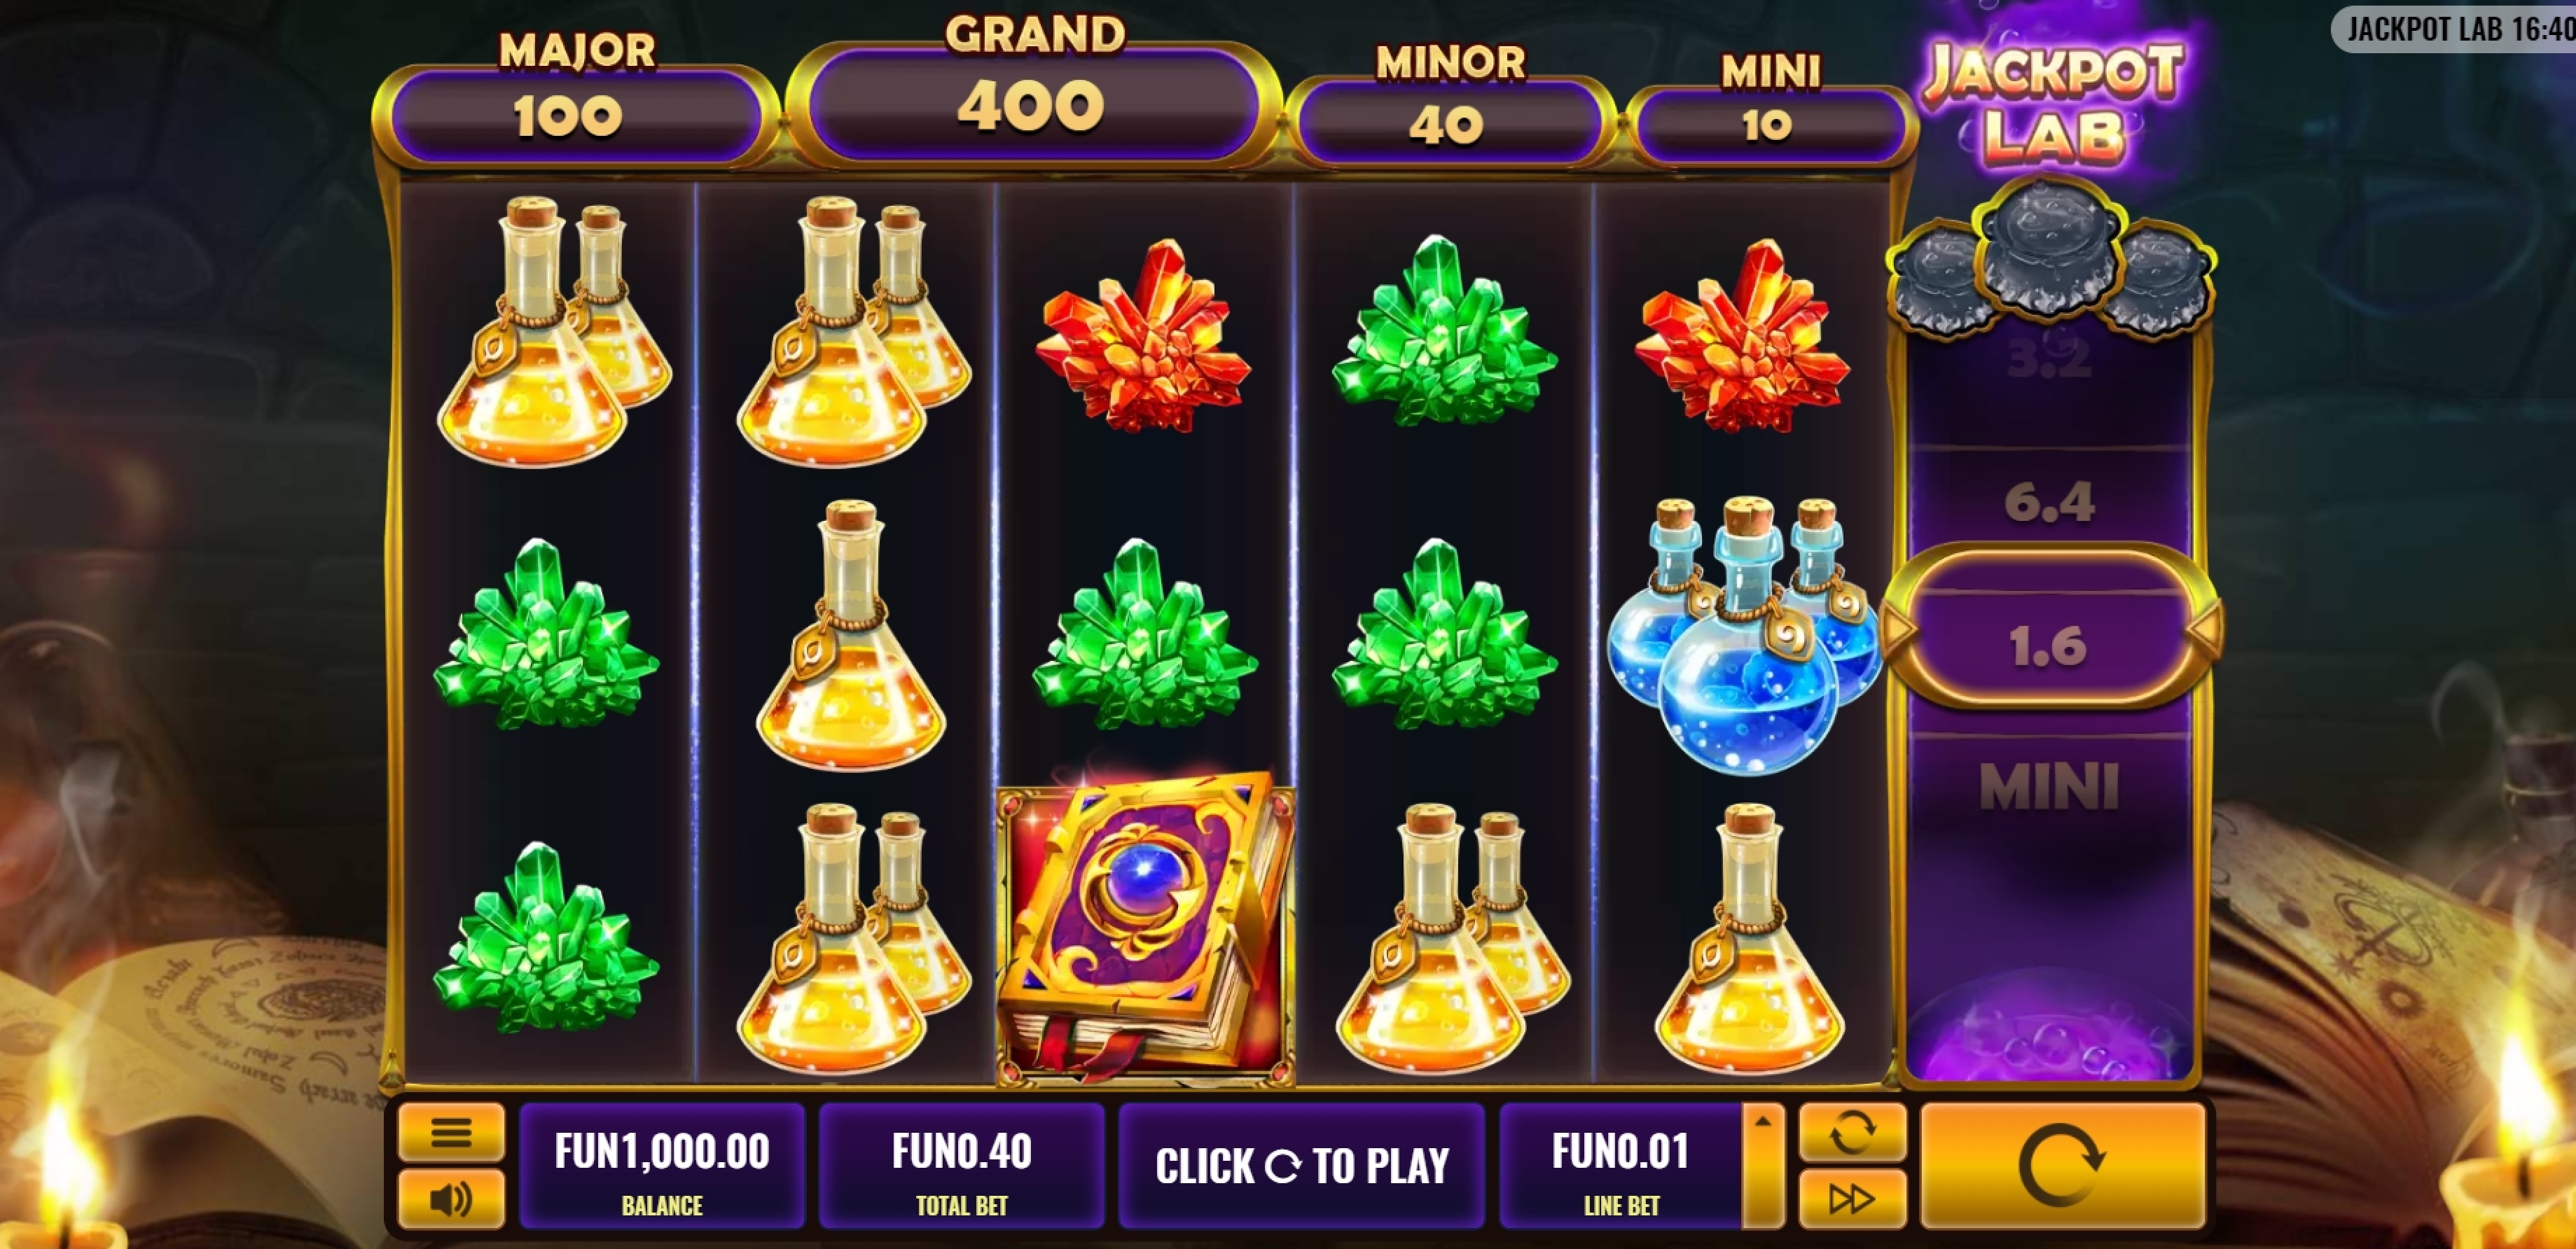 Reels in Jackpot Lab Slot Game by Platipus